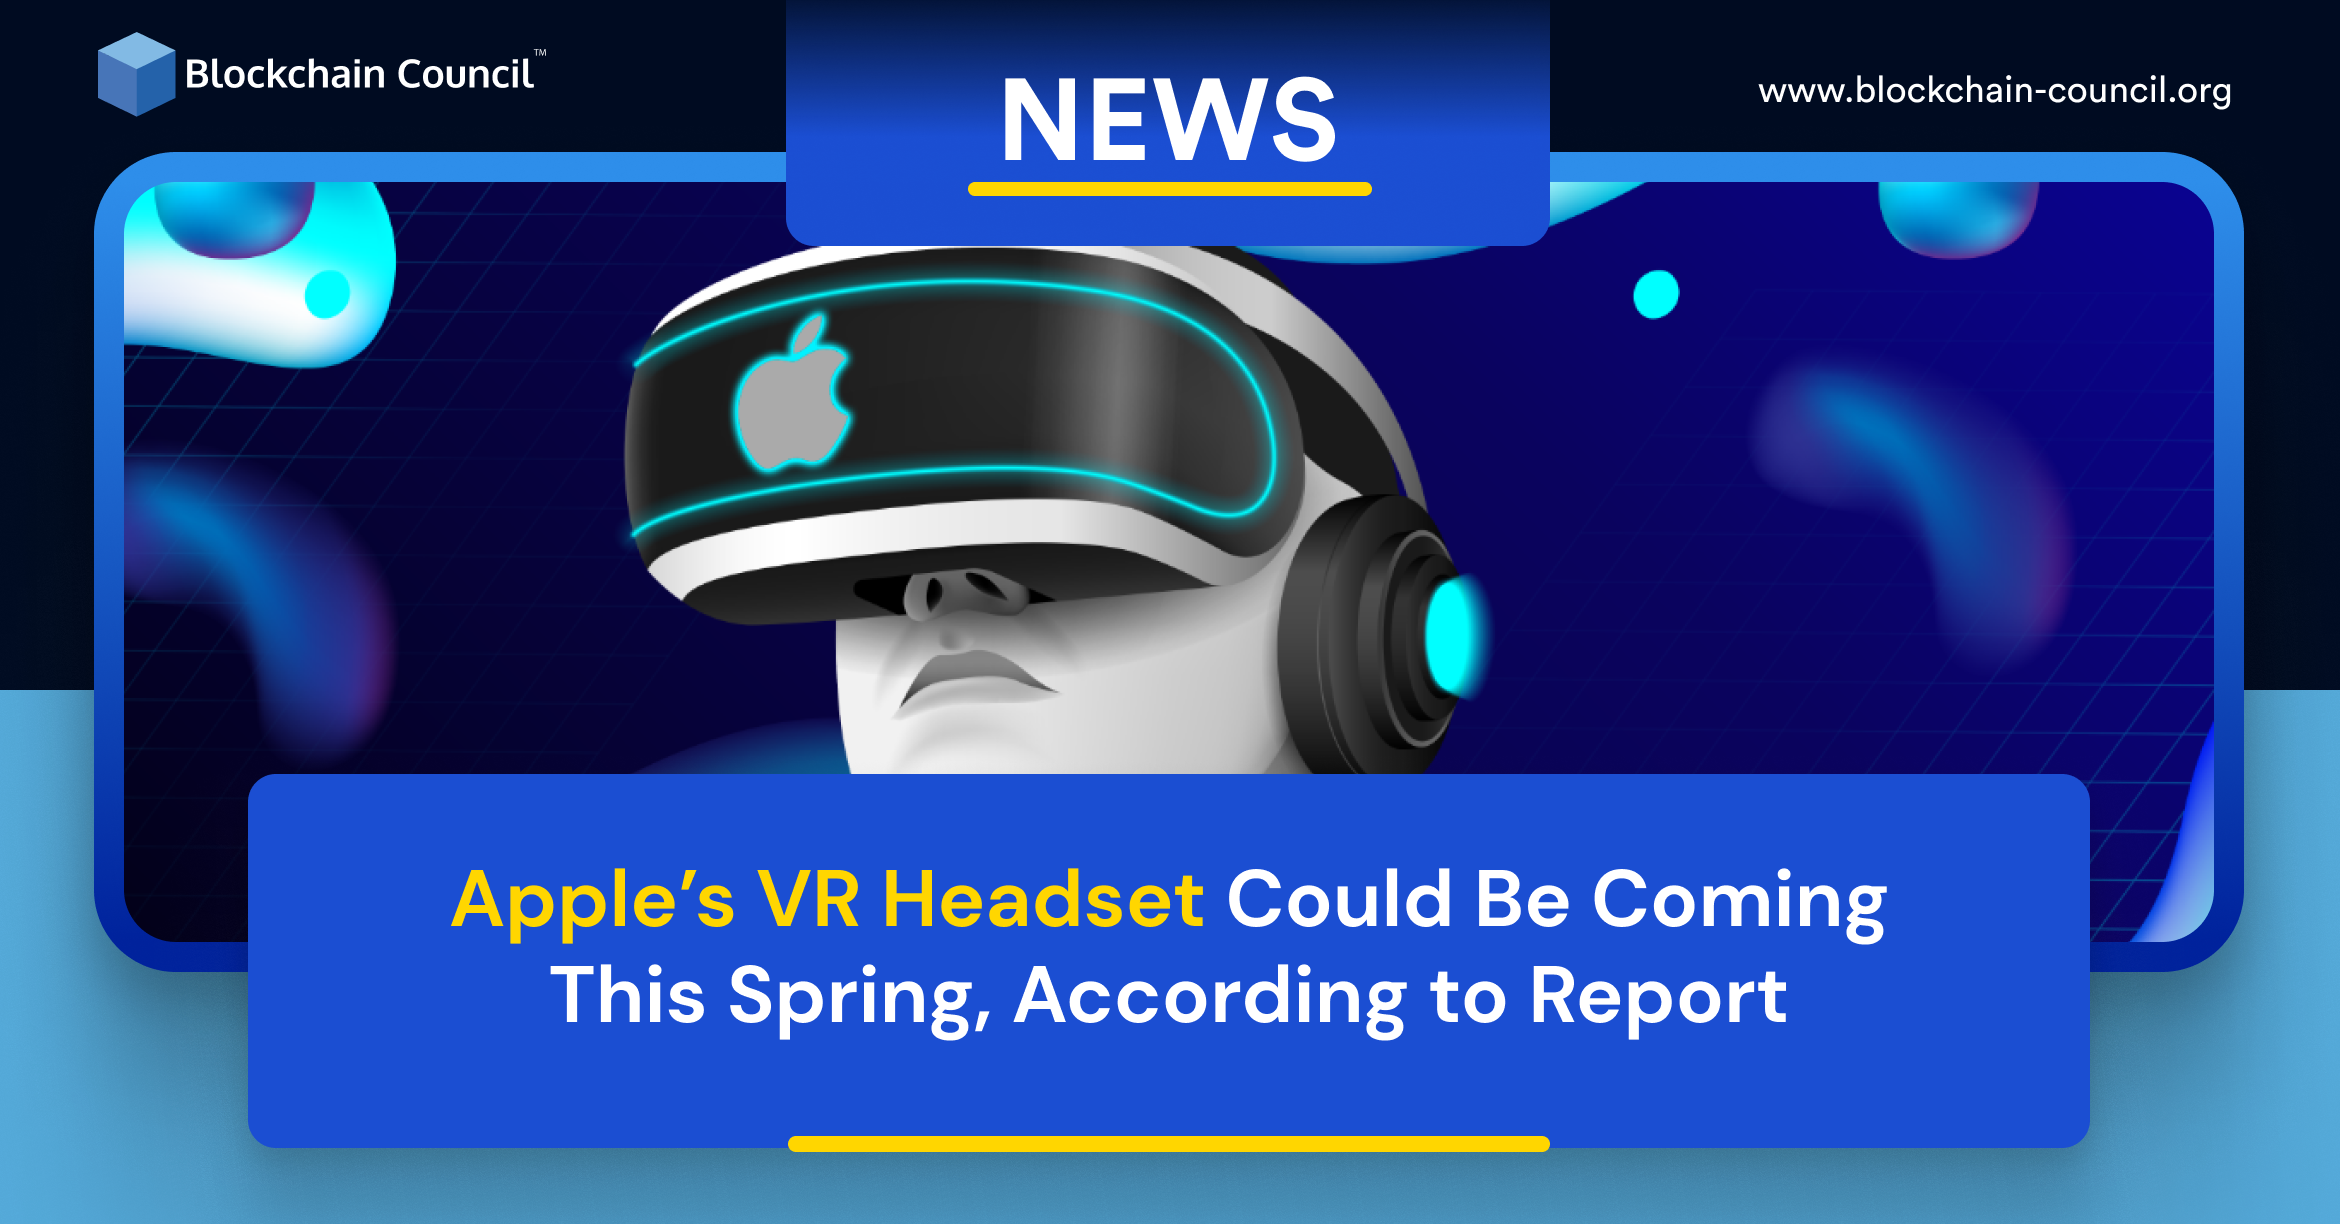 Apple’s VR Headset Could Be Coming This Spring, According to Report